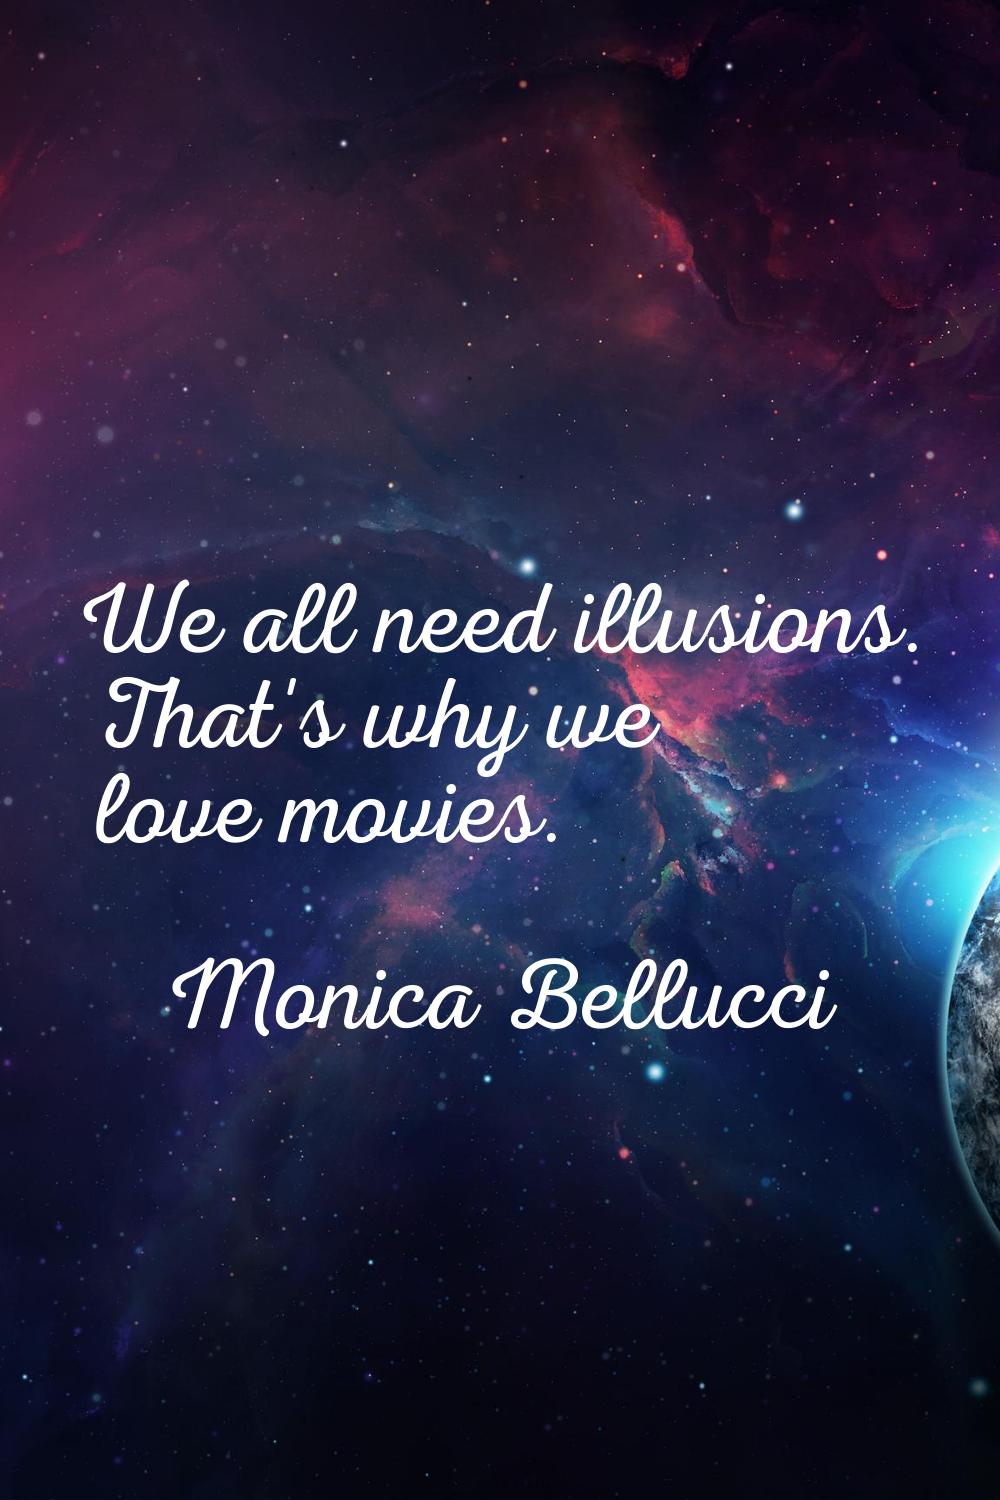 We all need illusions. That's why we love movies.